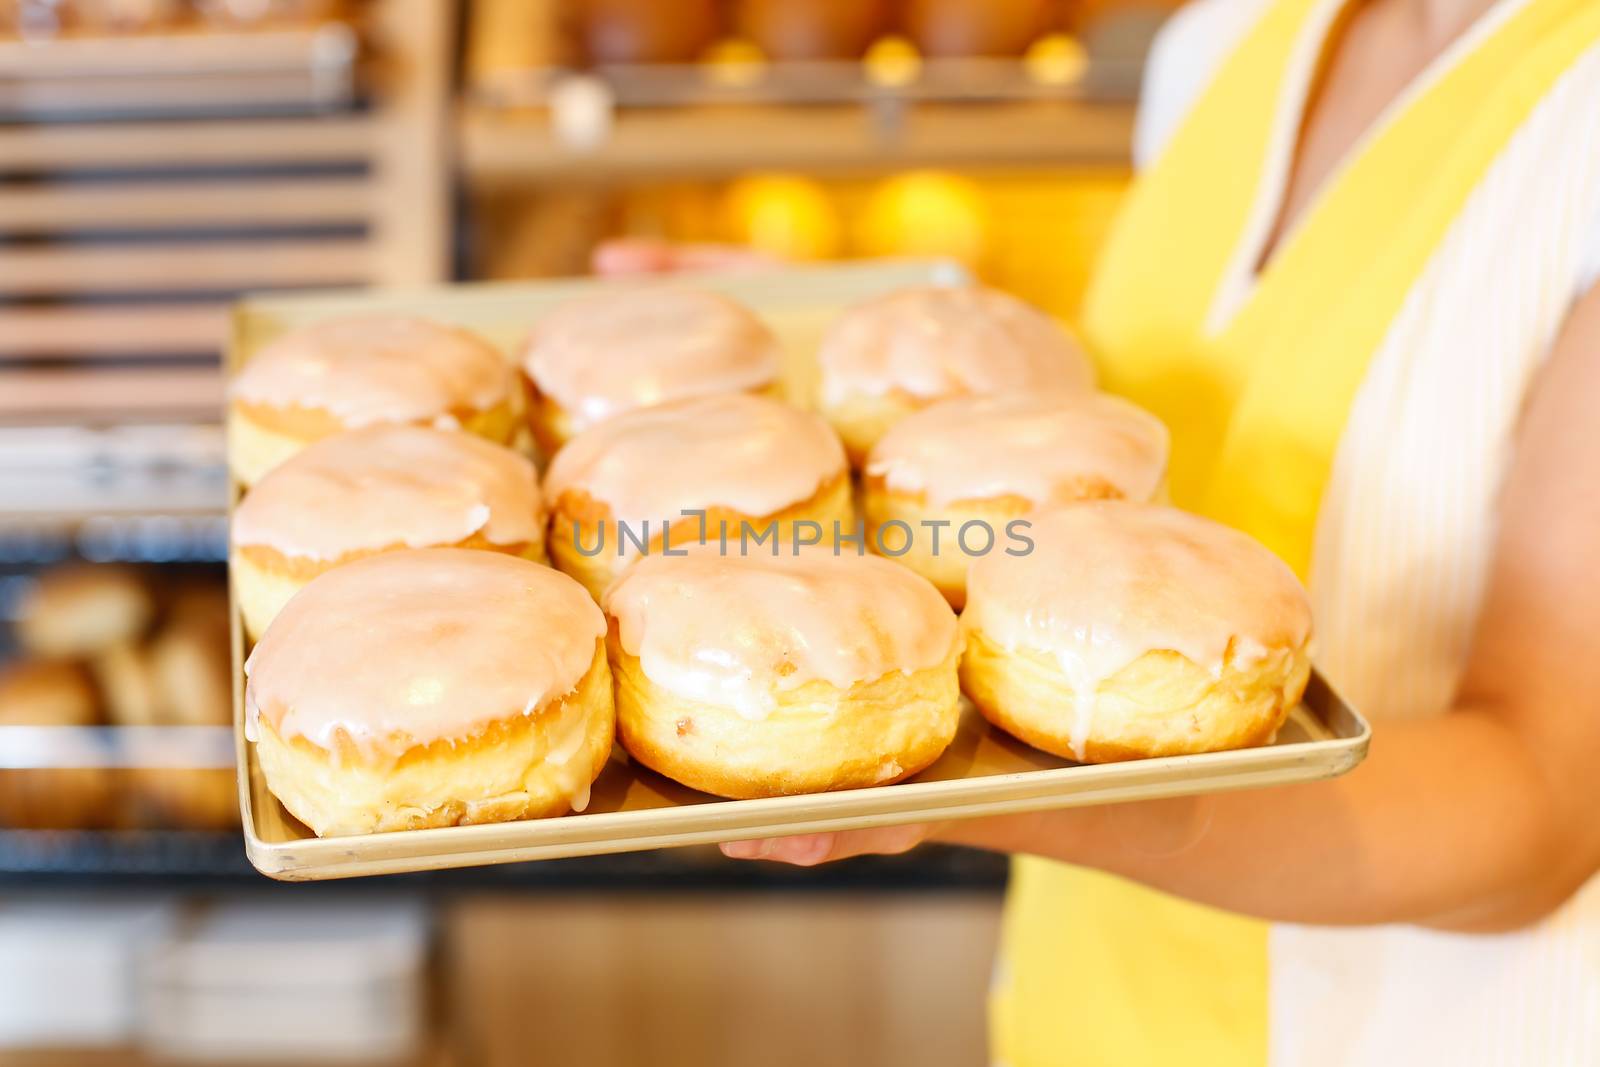 Bakery shopkeeper with a tablet full of doughnuts or Berliners